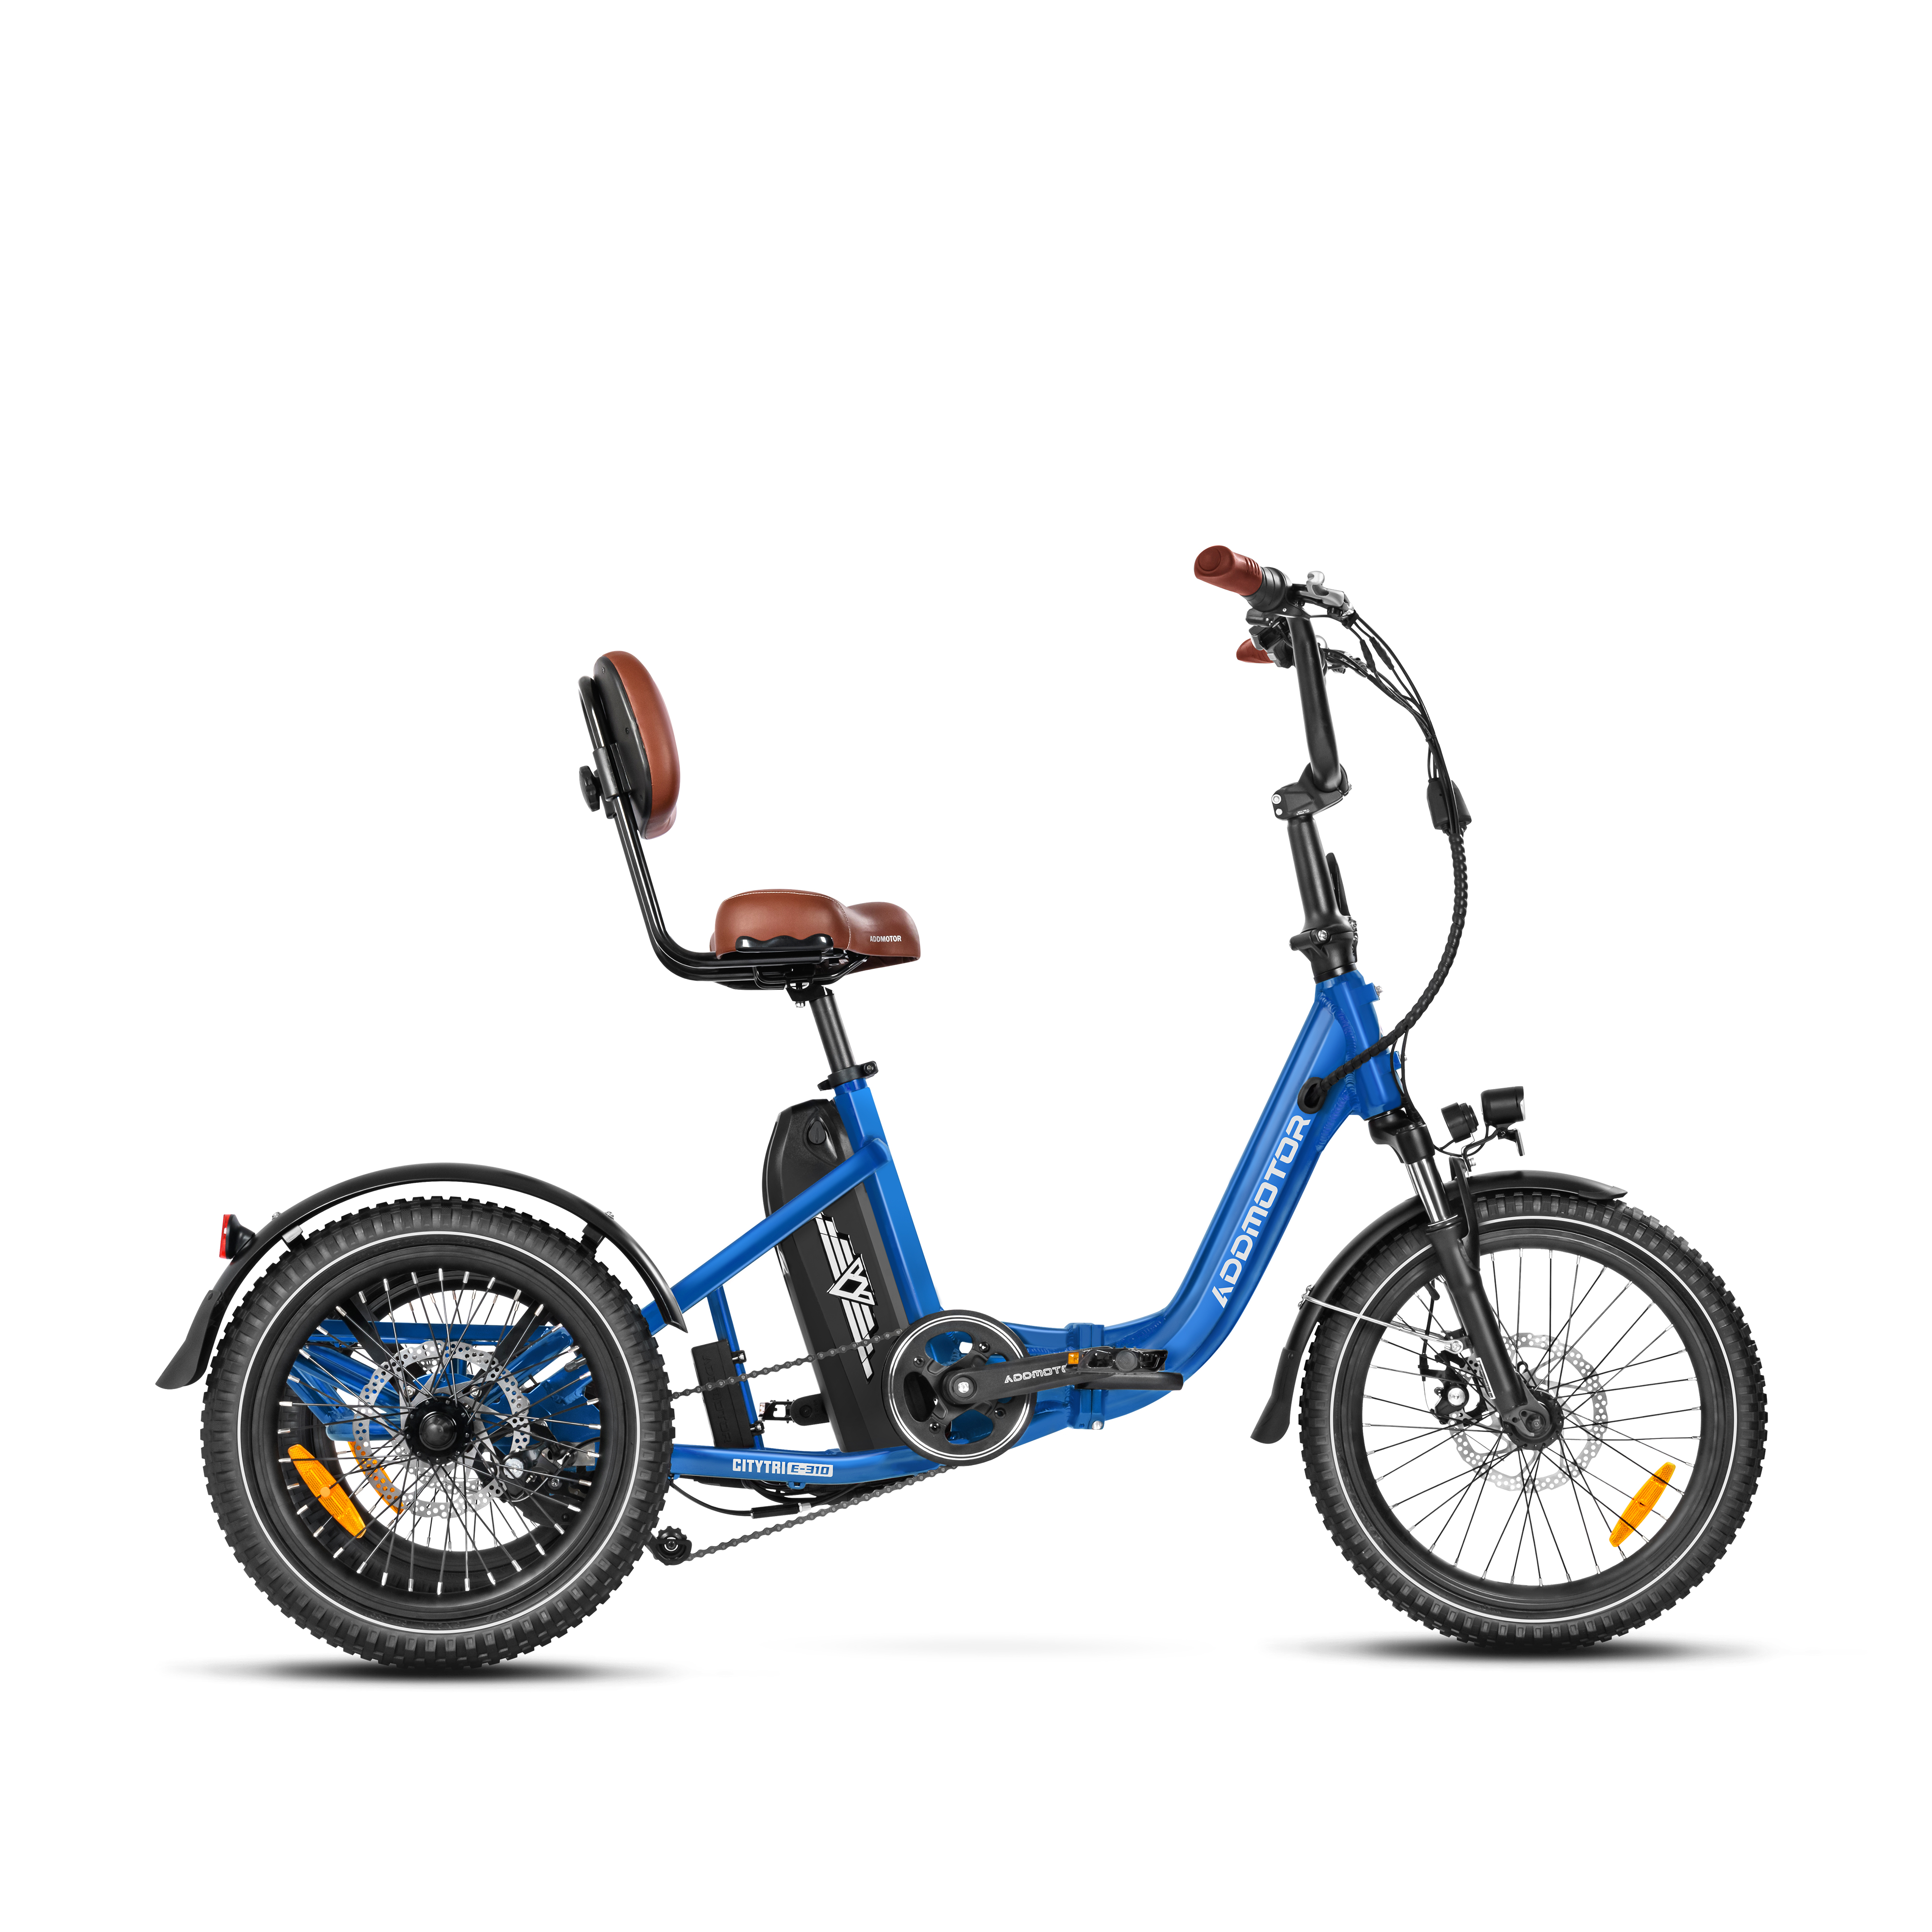 Addmotor Citytri E-310 750W Electric Trike for Adults Best Electric Tricycle Under $2000 Up To 90 Miles - Neptune Blue